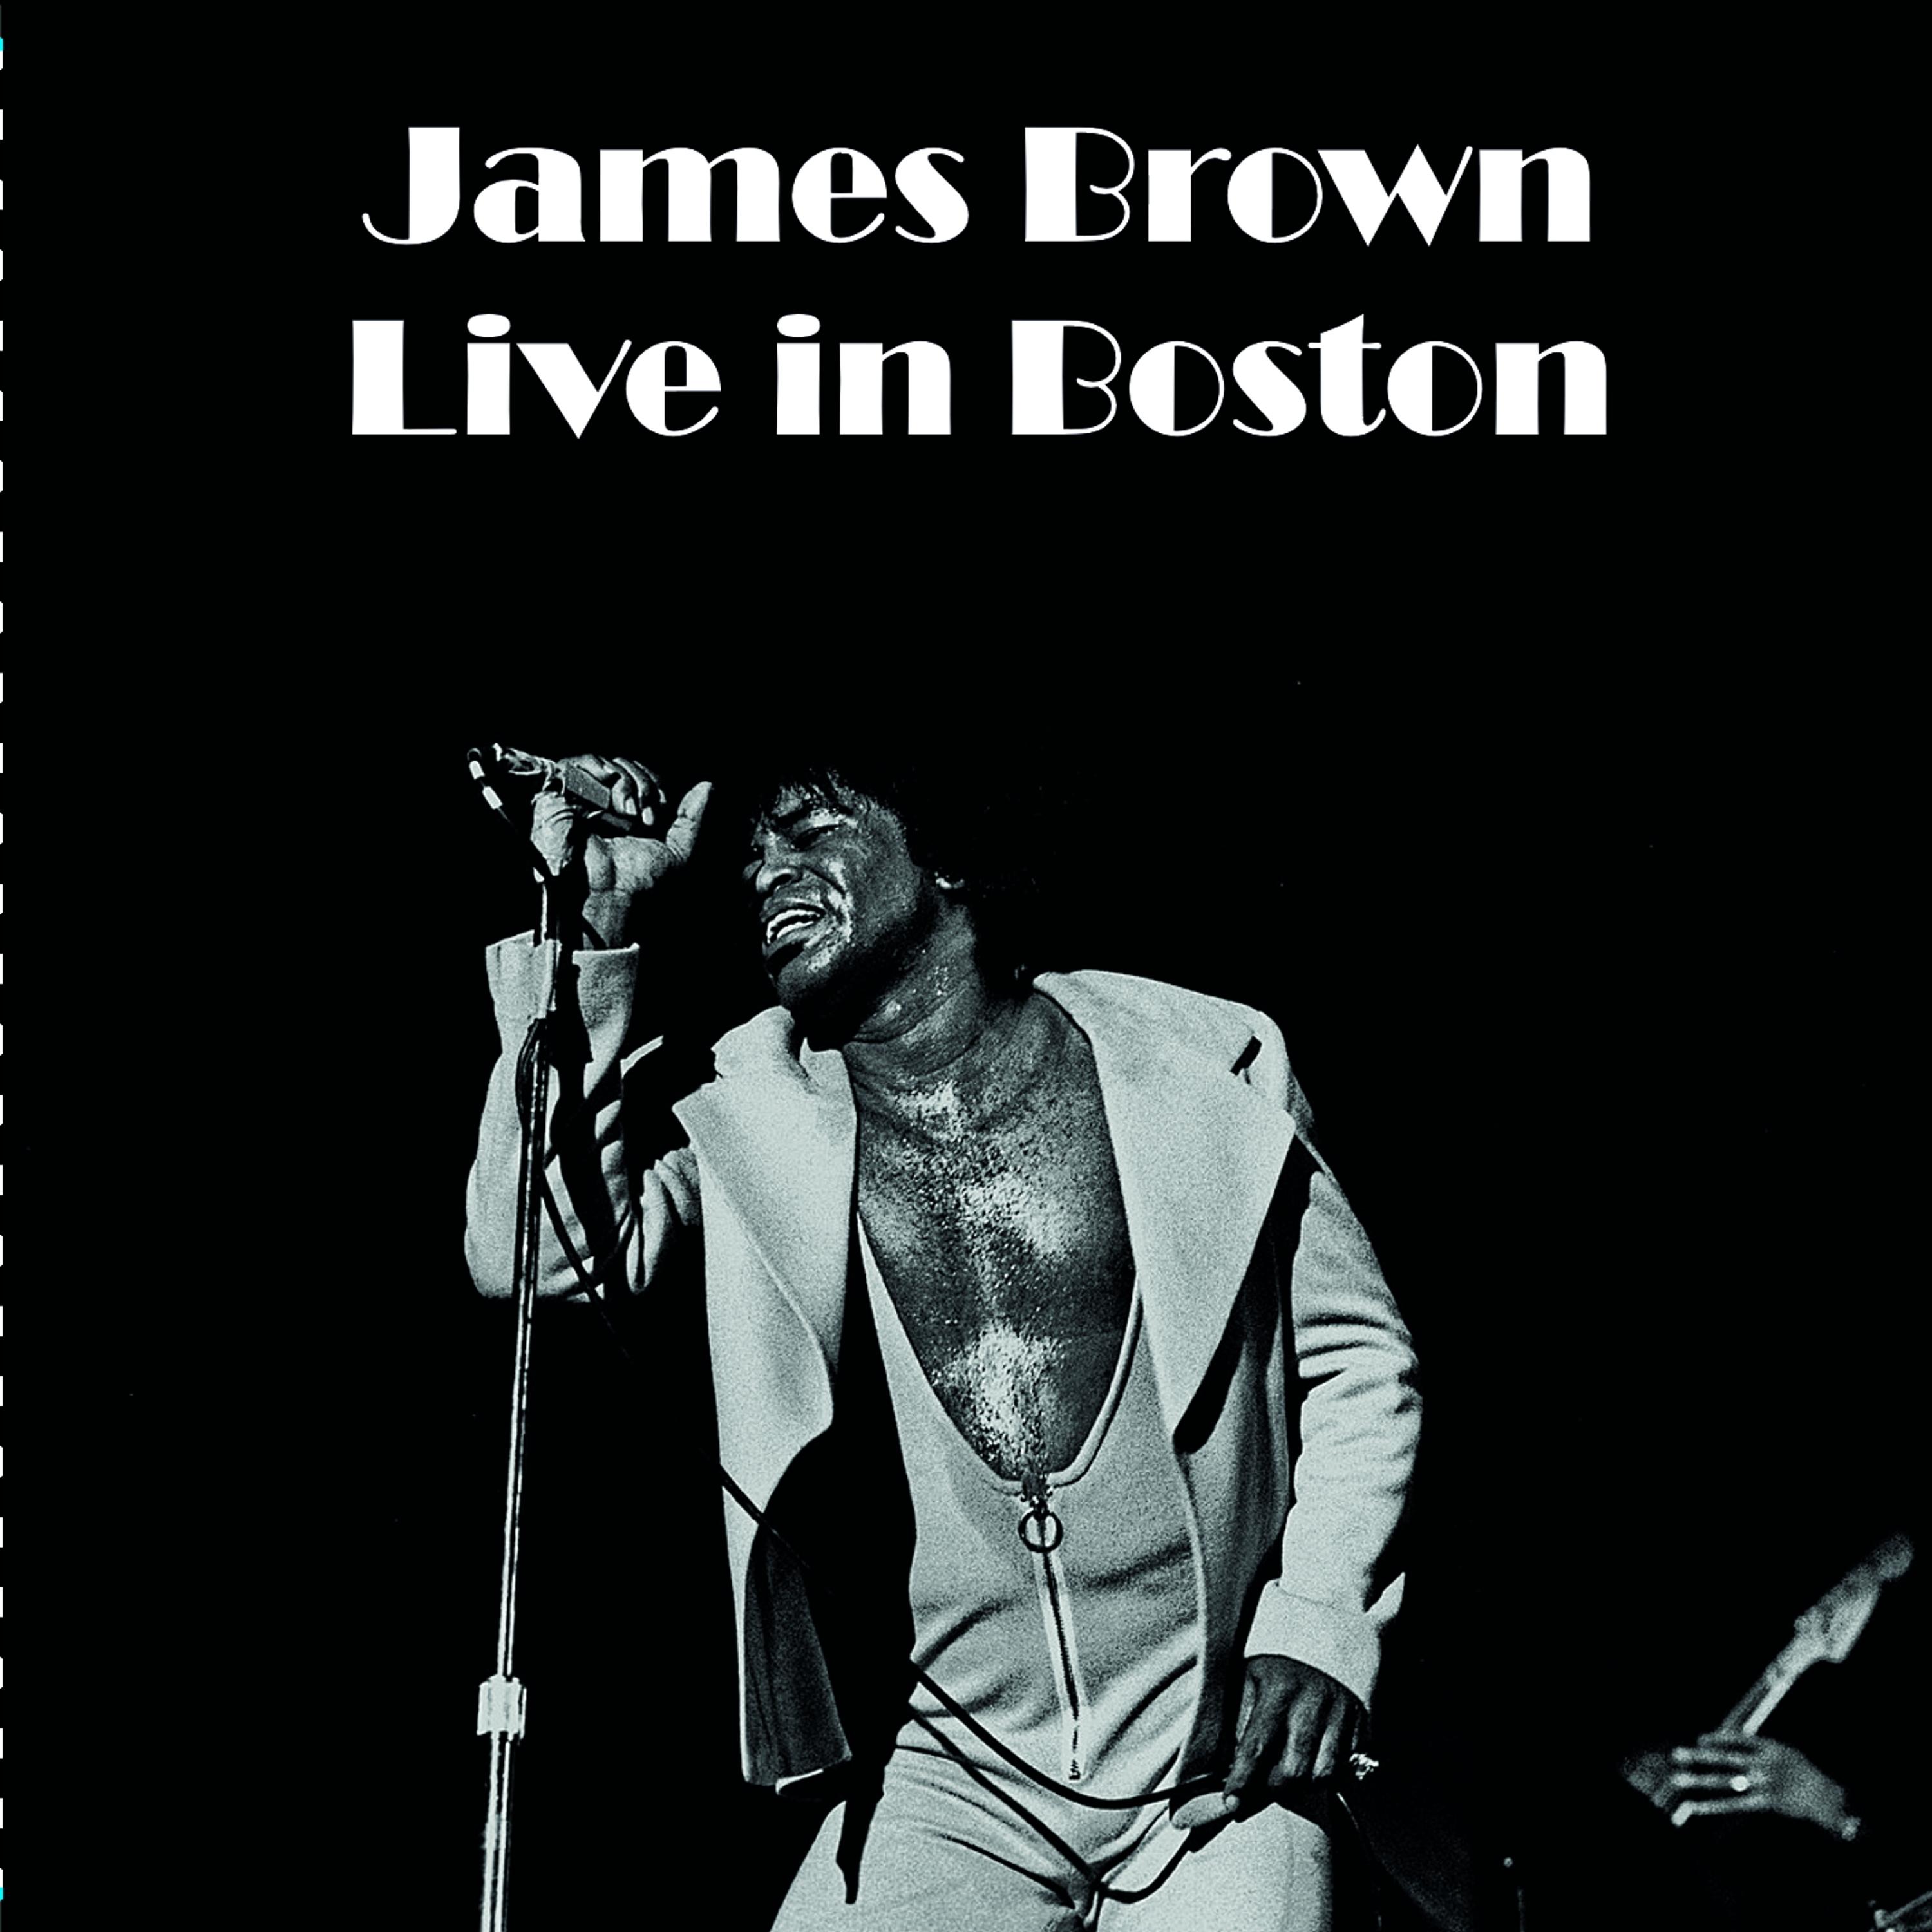 James Brown - Get Up Offa That Thing (Live)